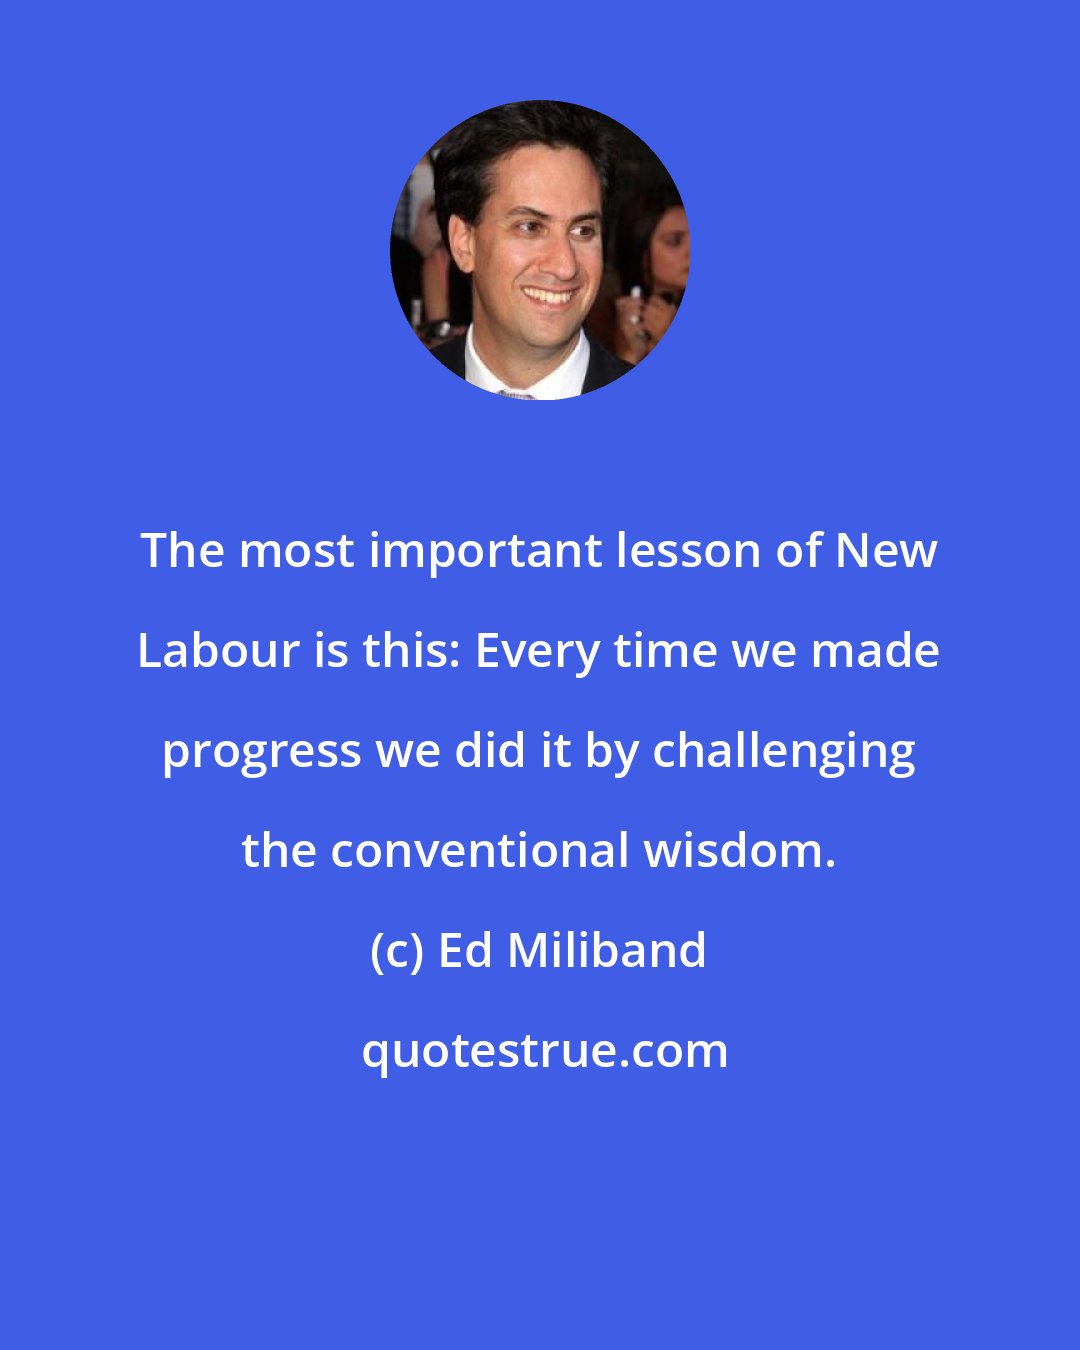 Ed Miliband: The most important lesson of New Labour is this: Every time we made progress we did it by challenging the conventional wisdom.